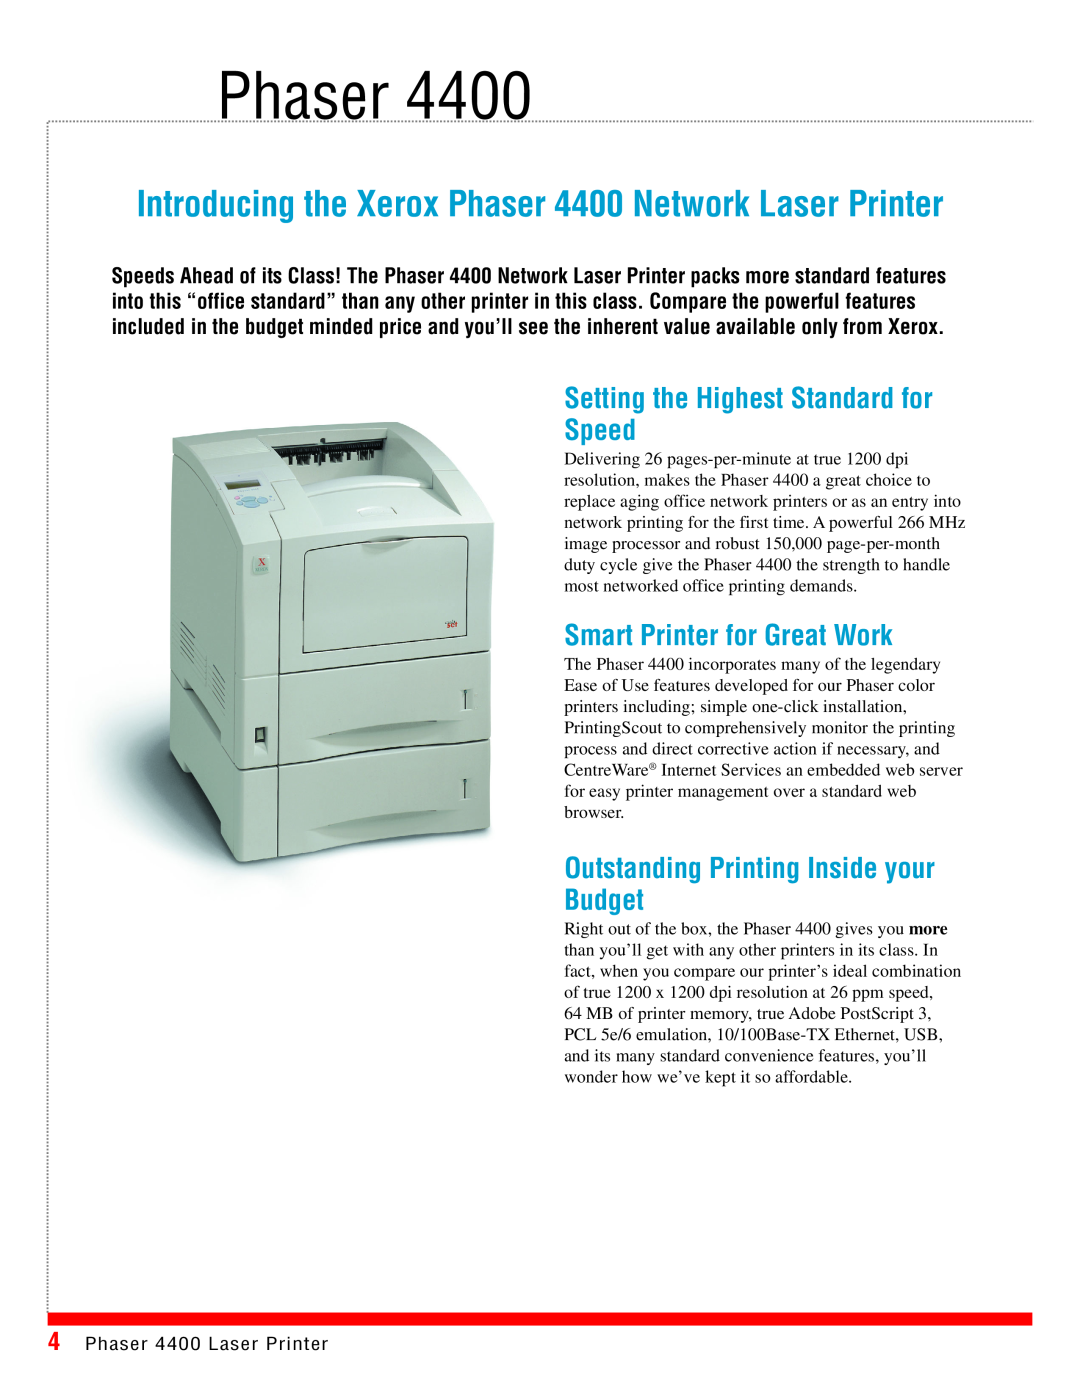 Xerox 4400 manual Phaser, Setting the Highest Standard for Speed, Smart Printer for Great Work 